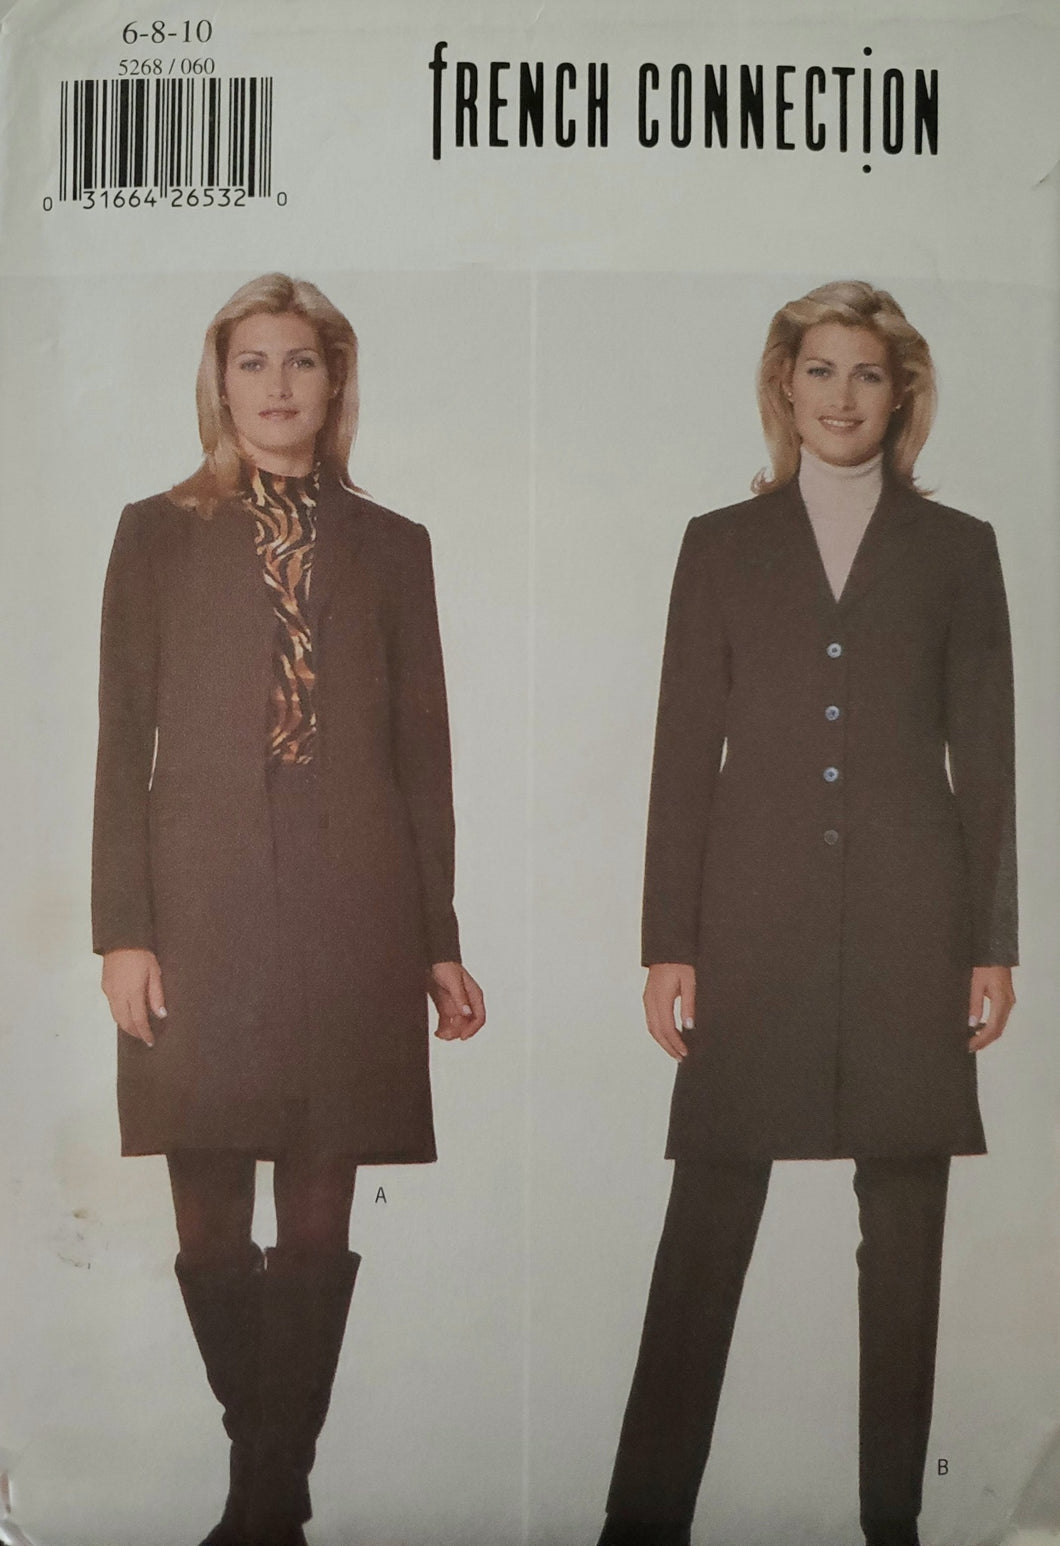 Butterick 5268 UNCUT, French Connection Coat, Skirt and Pants, Size 6-8-10